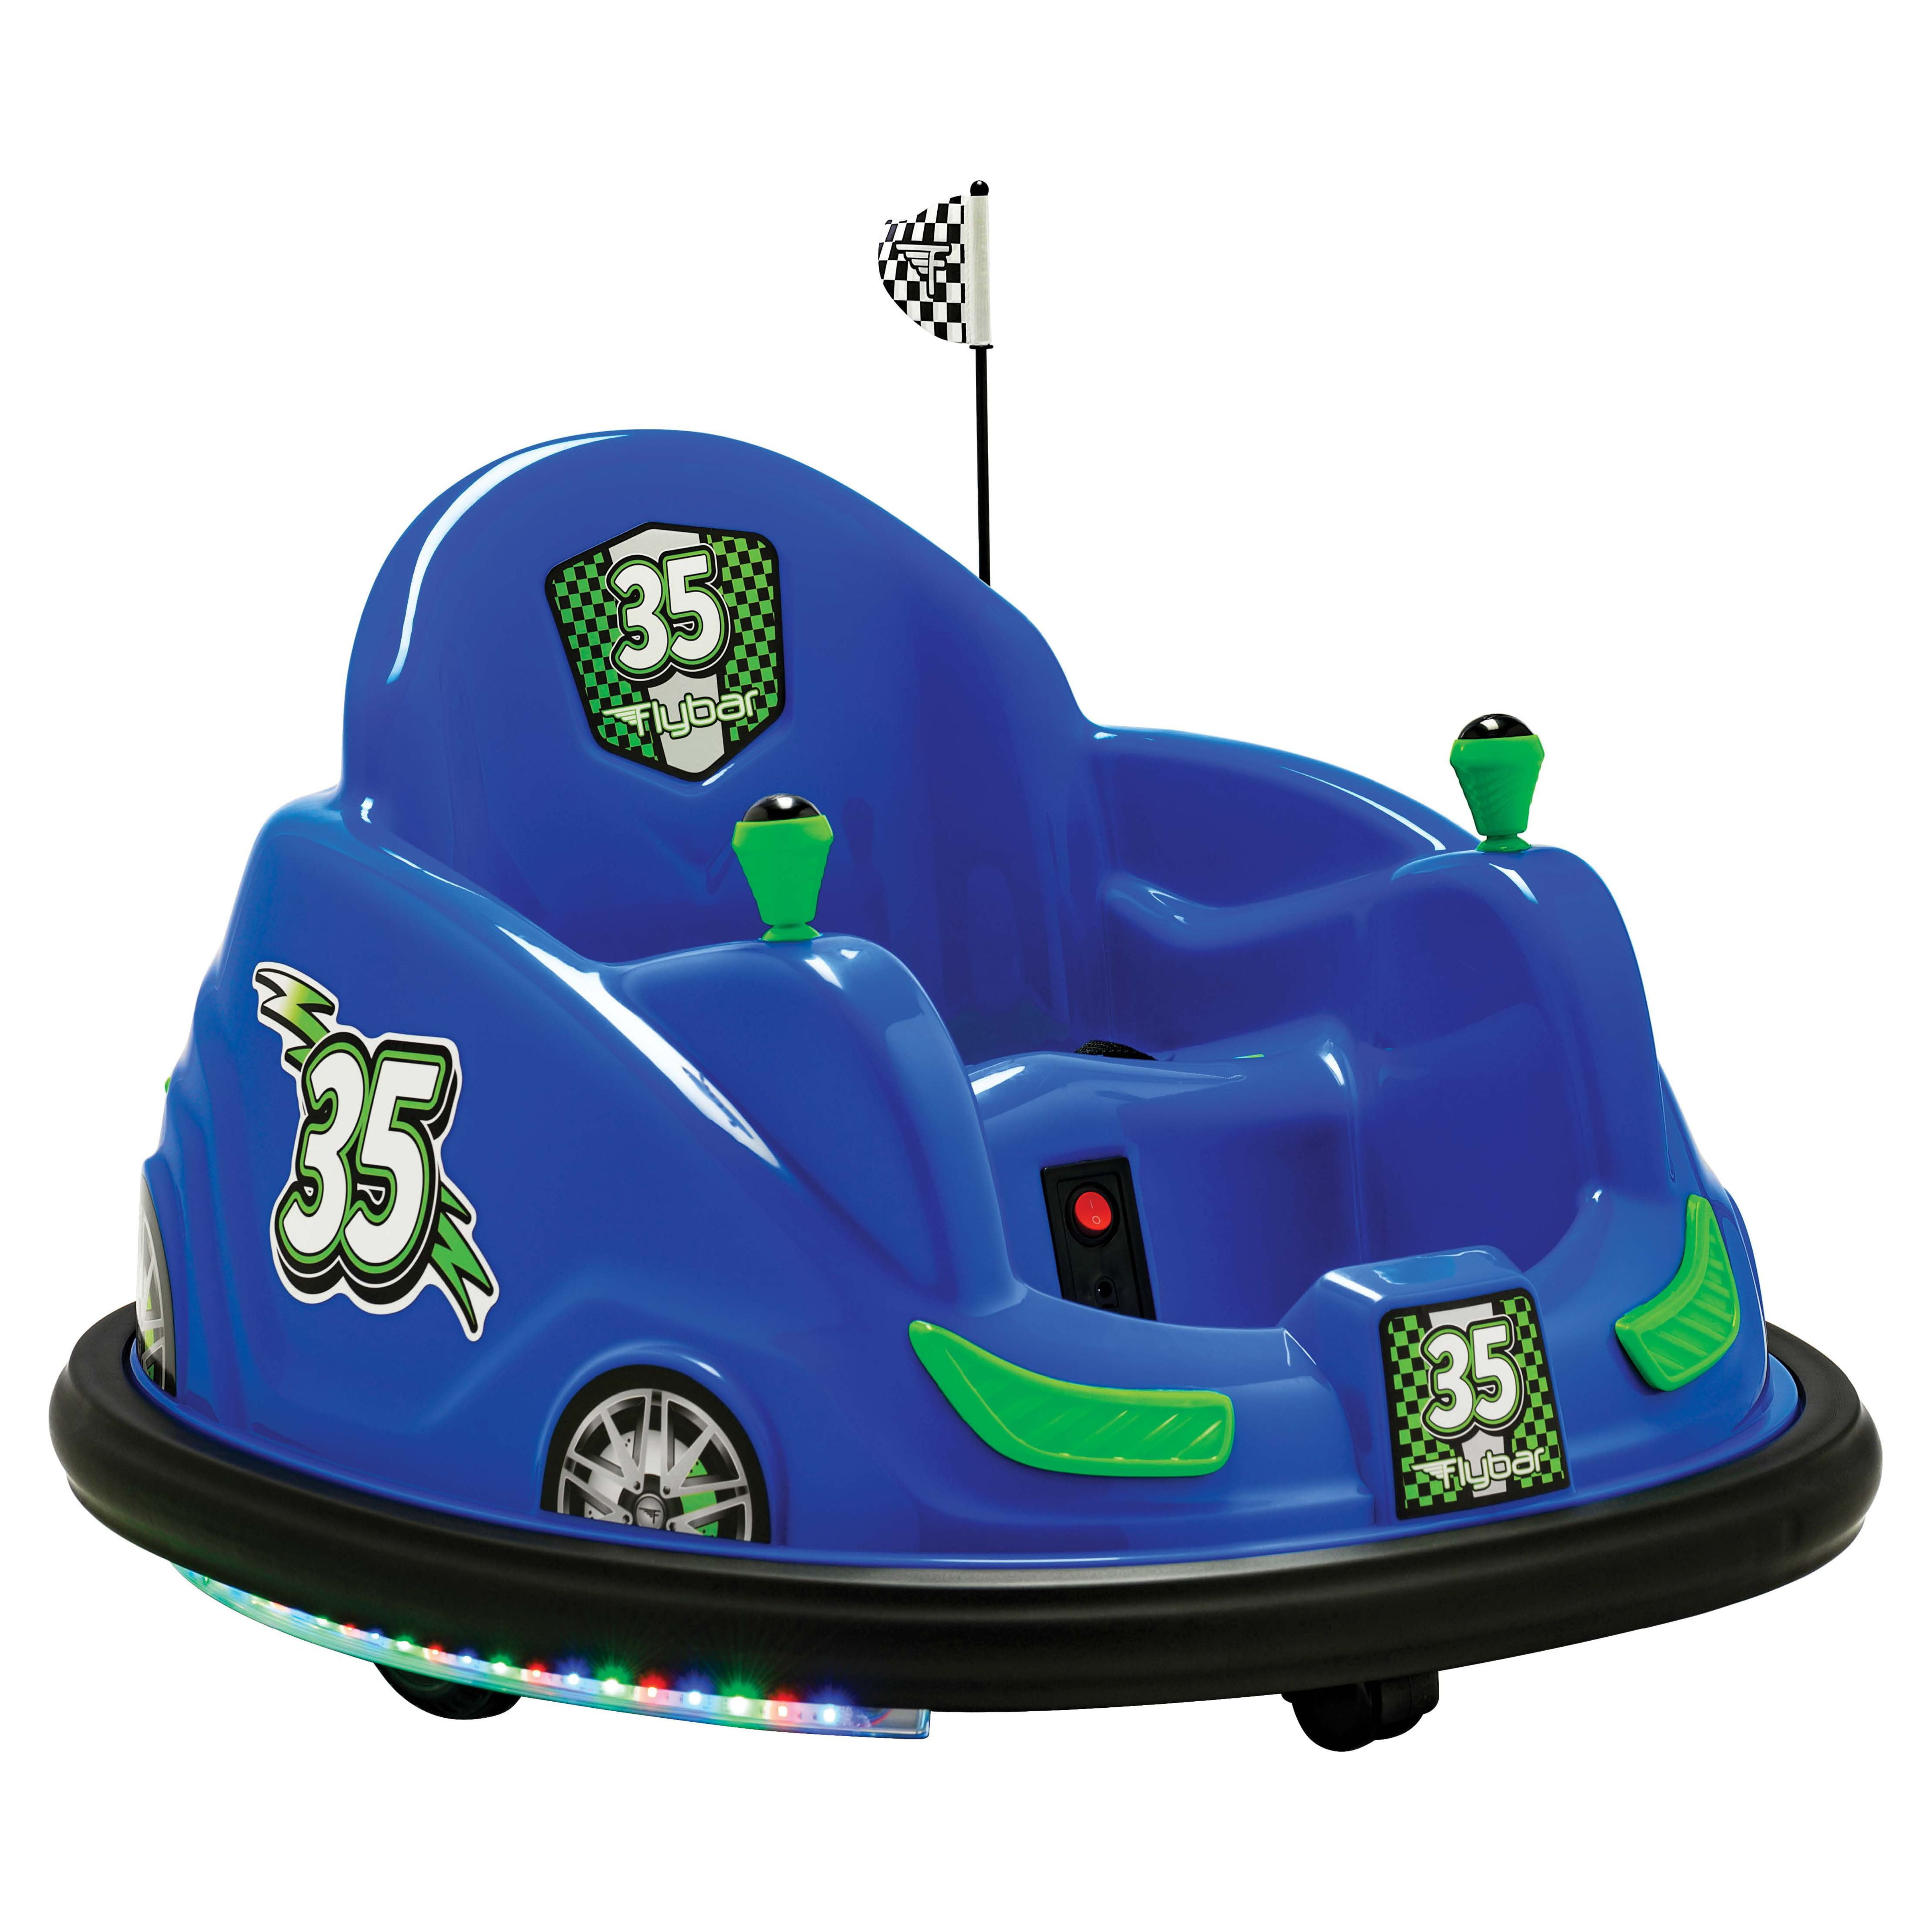 Electric Ride On Bumper Car Vehicle for Kids and Toddlers – Flybar